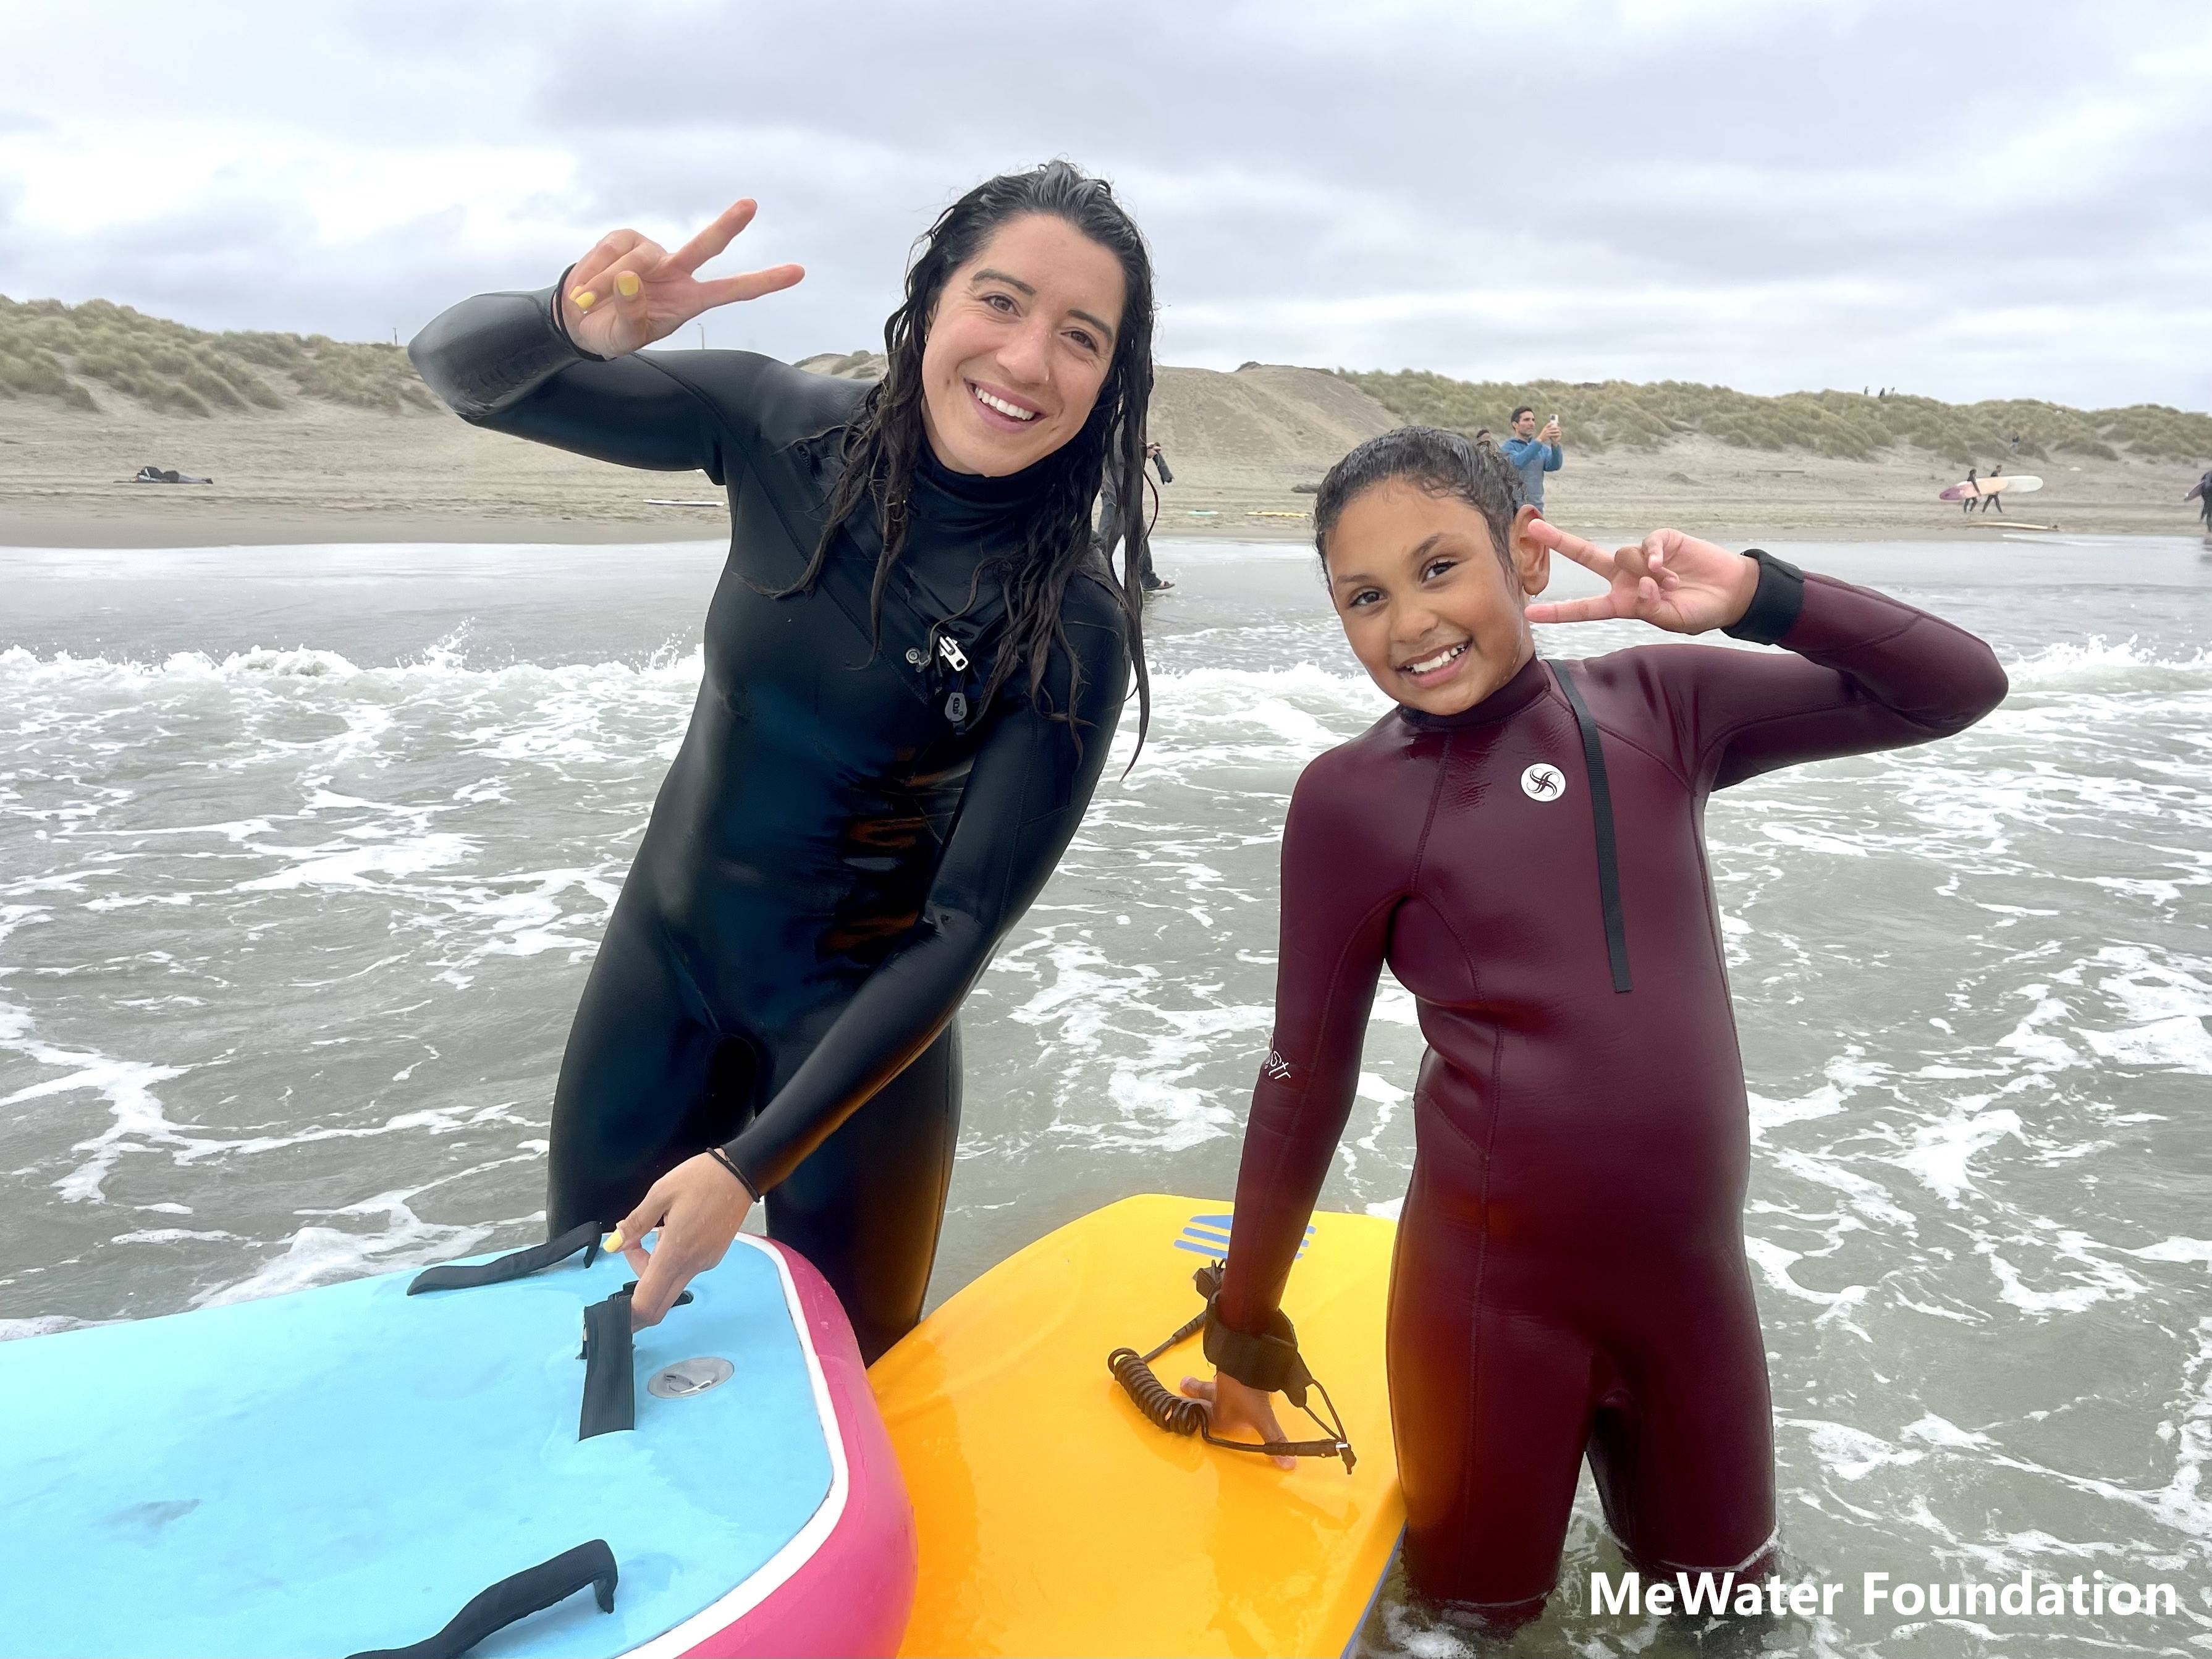 A young person and an adult stand in the surf wearing wetsuits and holding boogie boards while smiling for the camera. Photo: MeWater Foundation.